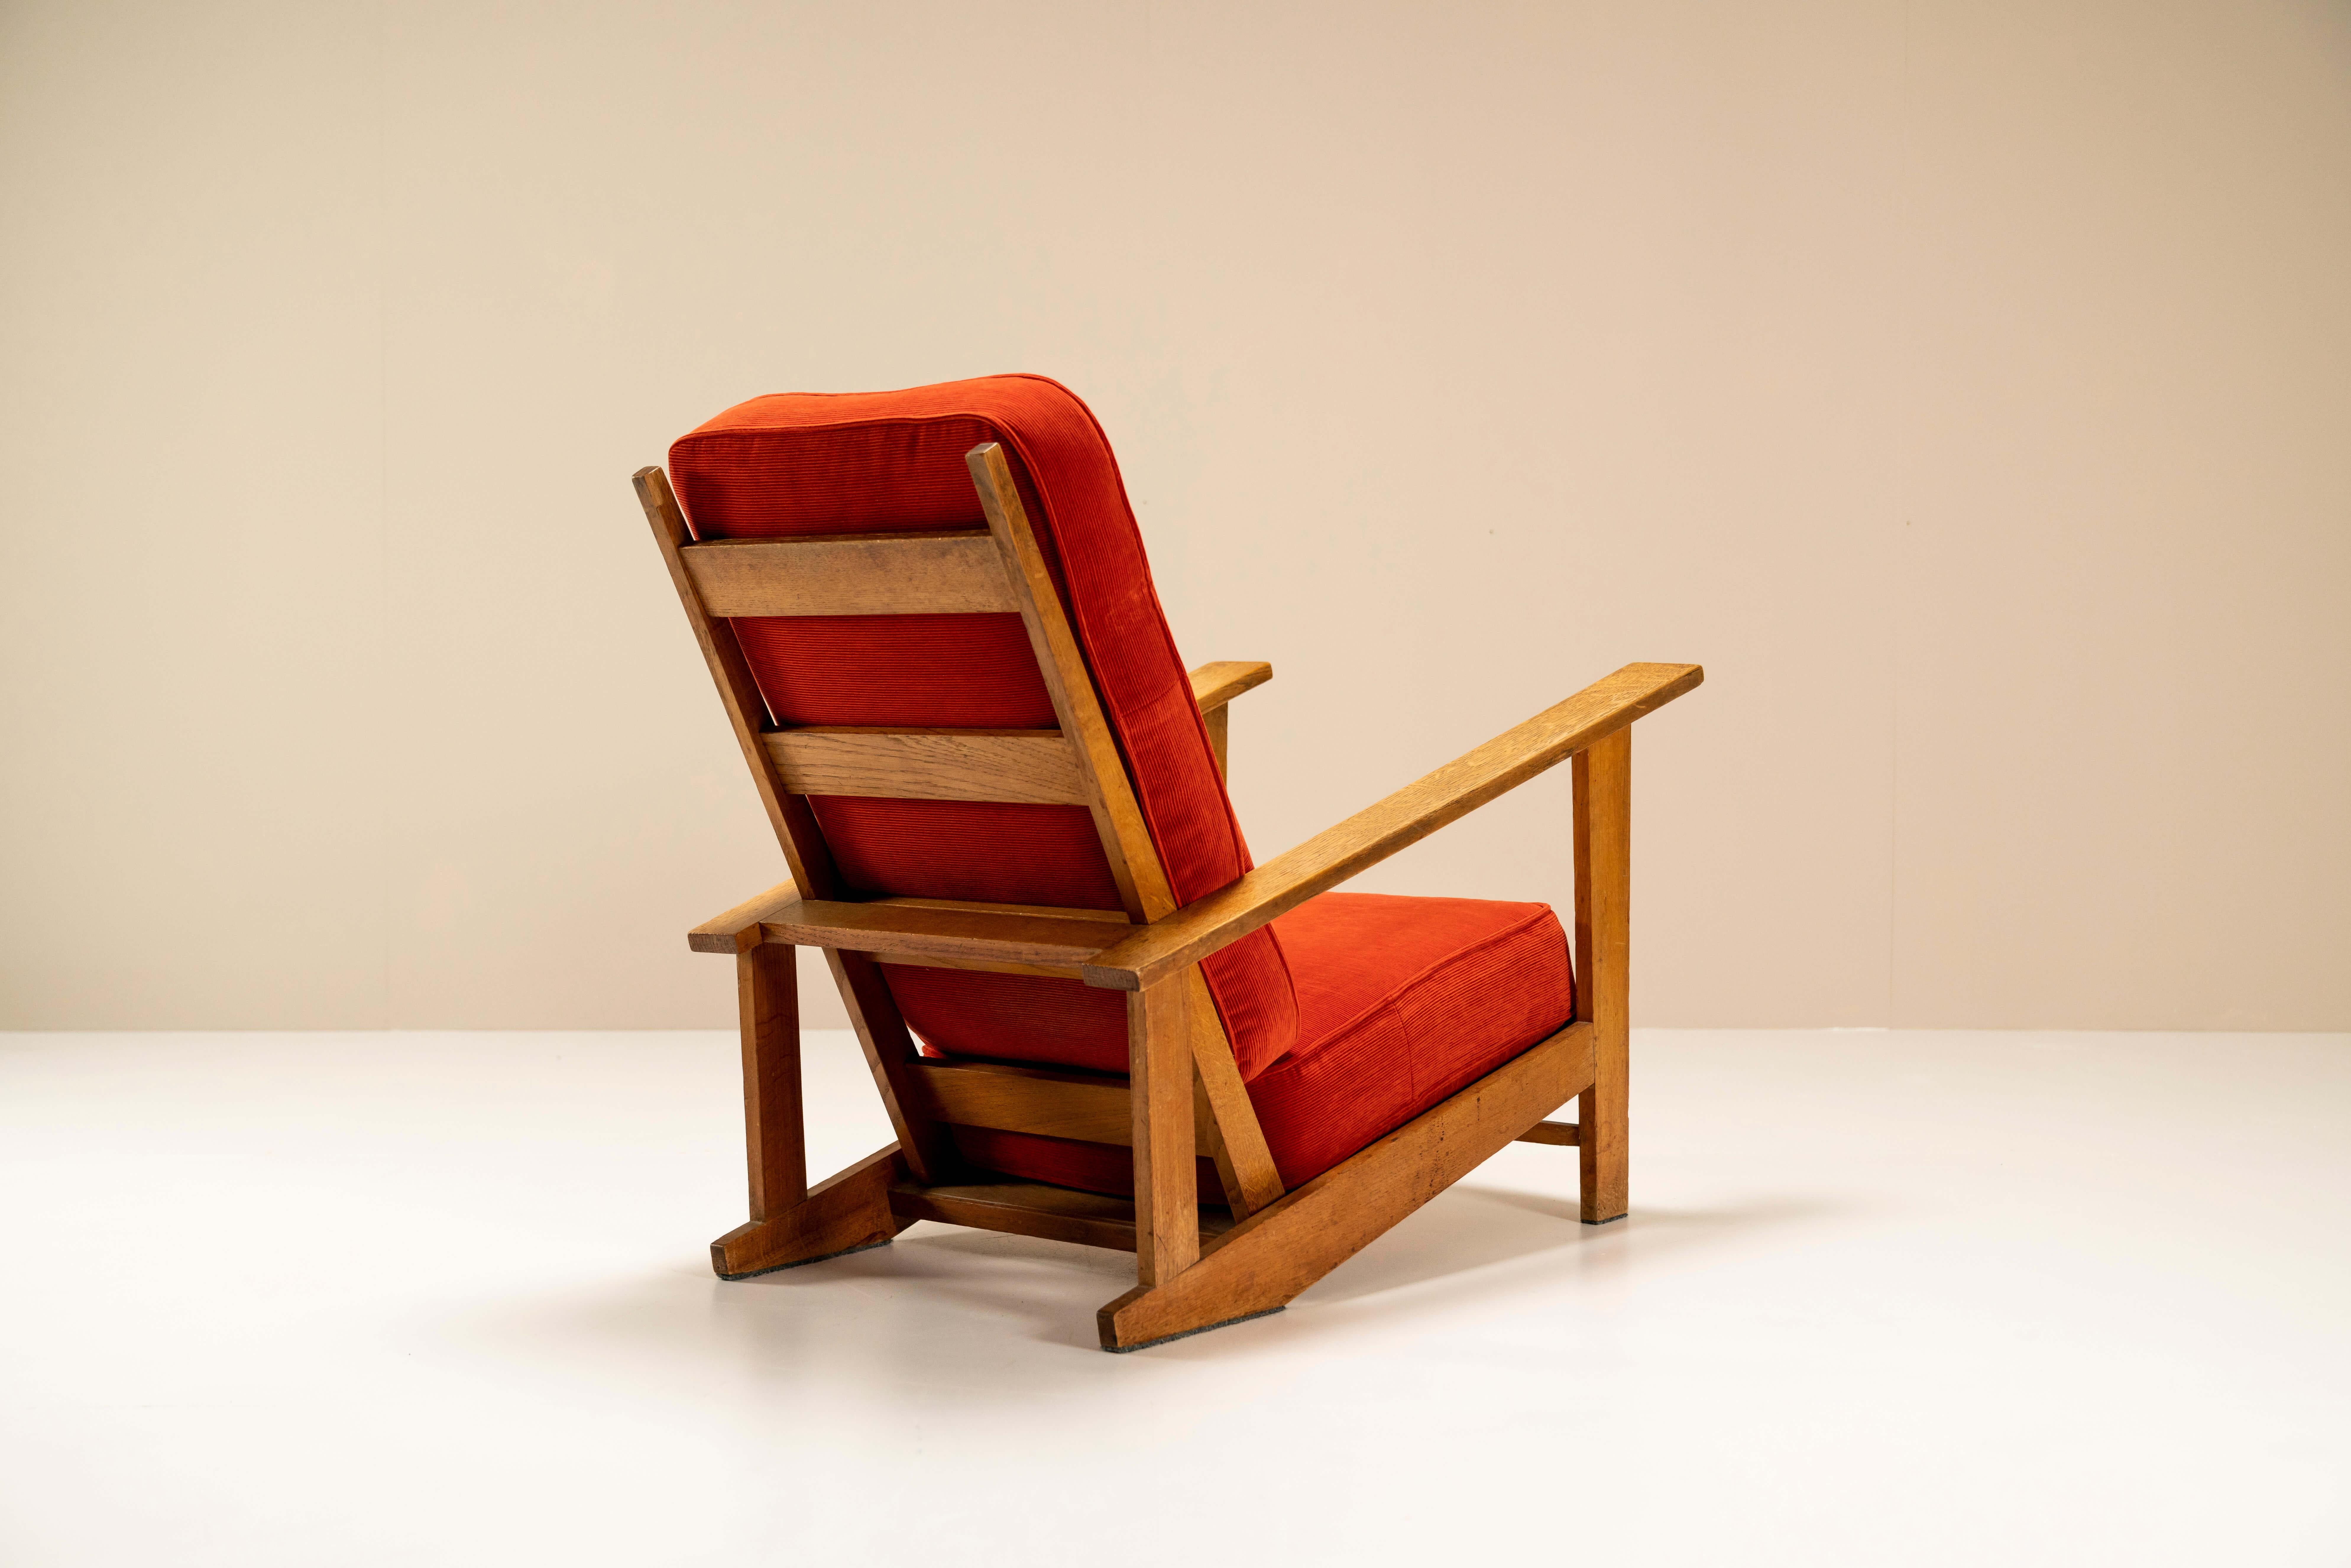 Dutch Lounge Chairs in Beech and Vermillion Upholstery Attr. to Groenekan 1950s For Sale 2